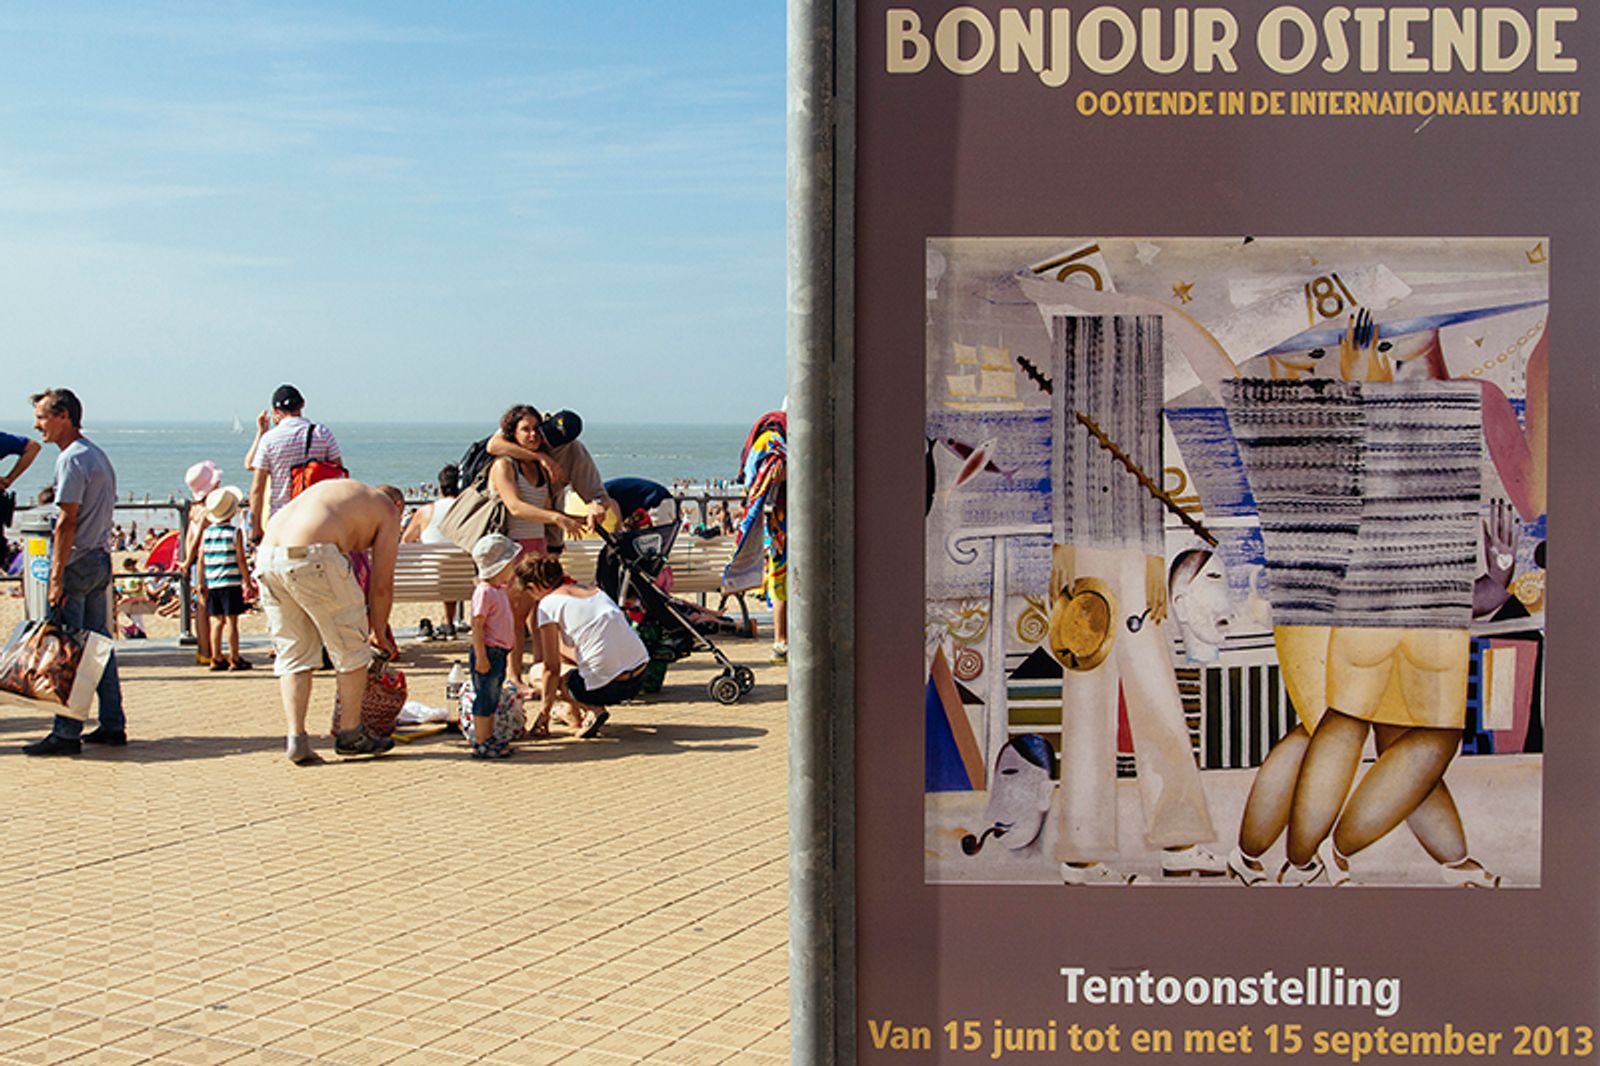 © Andrea Shkreli - Image from the Bonjour Ostende photography project